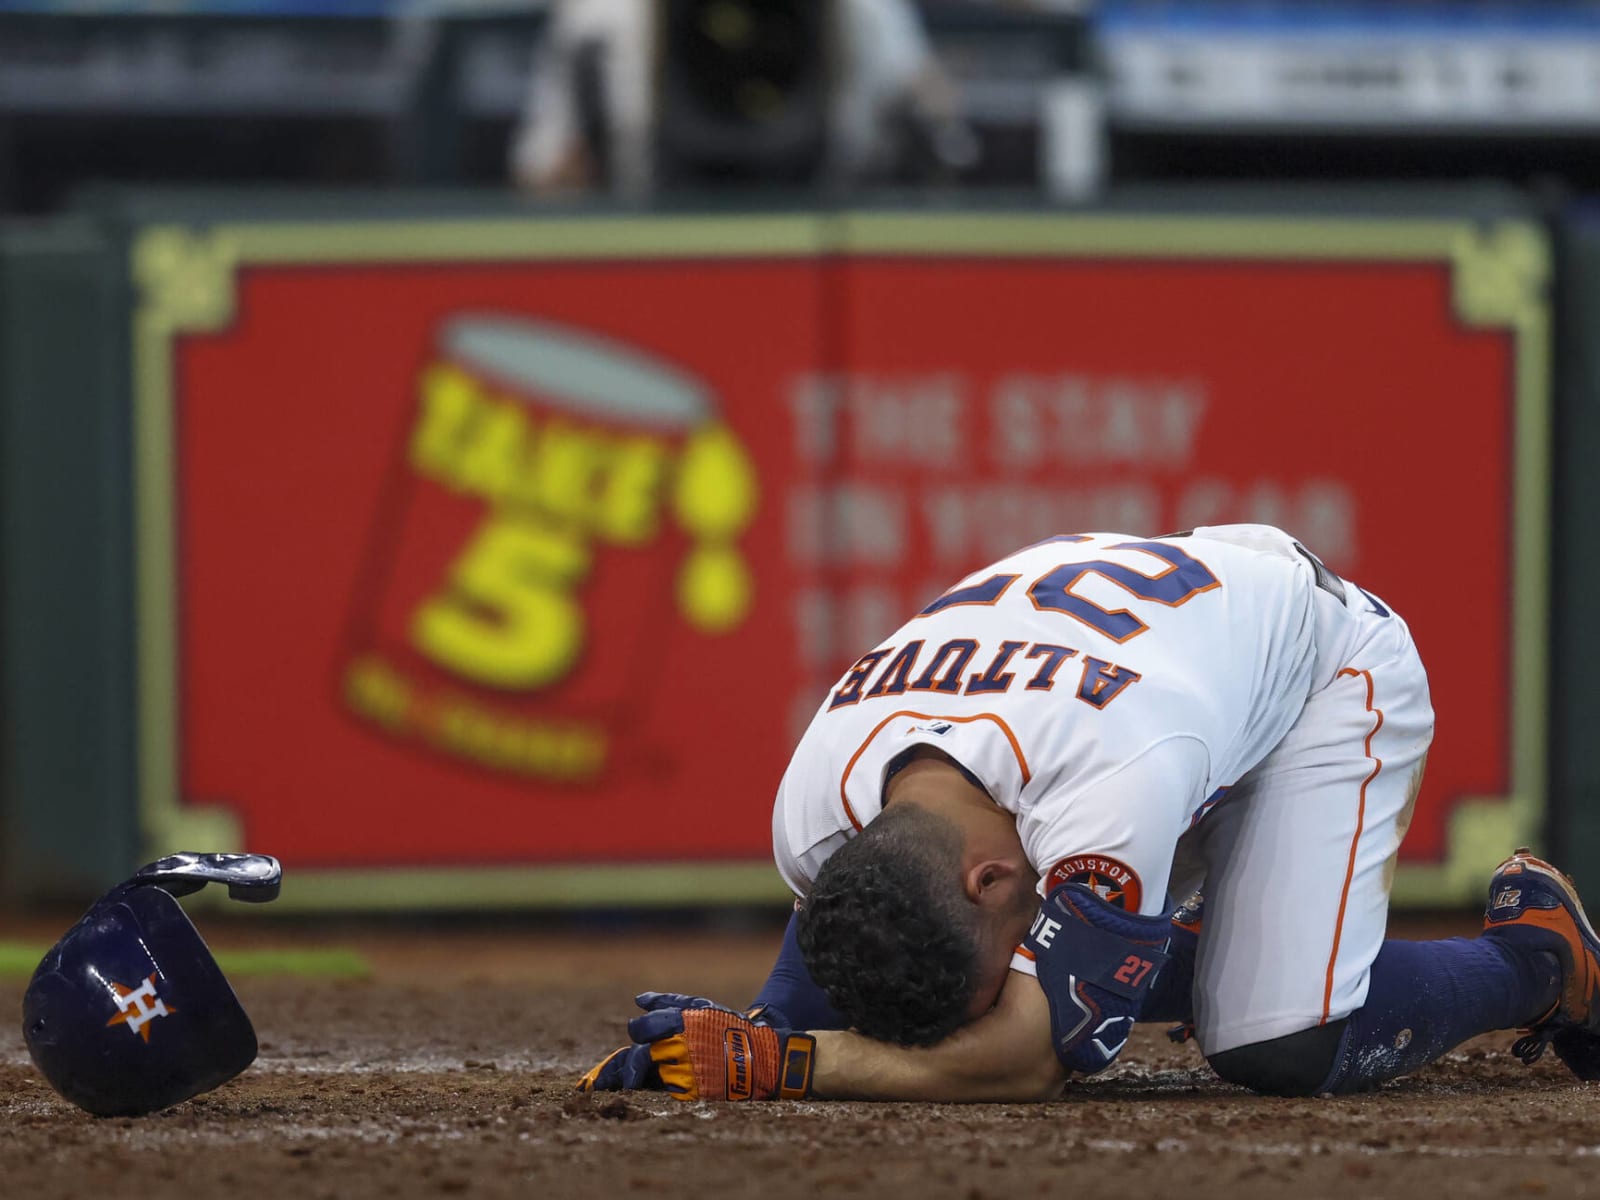 Jose Altuve exits game against Marlins after fouling pitch off his